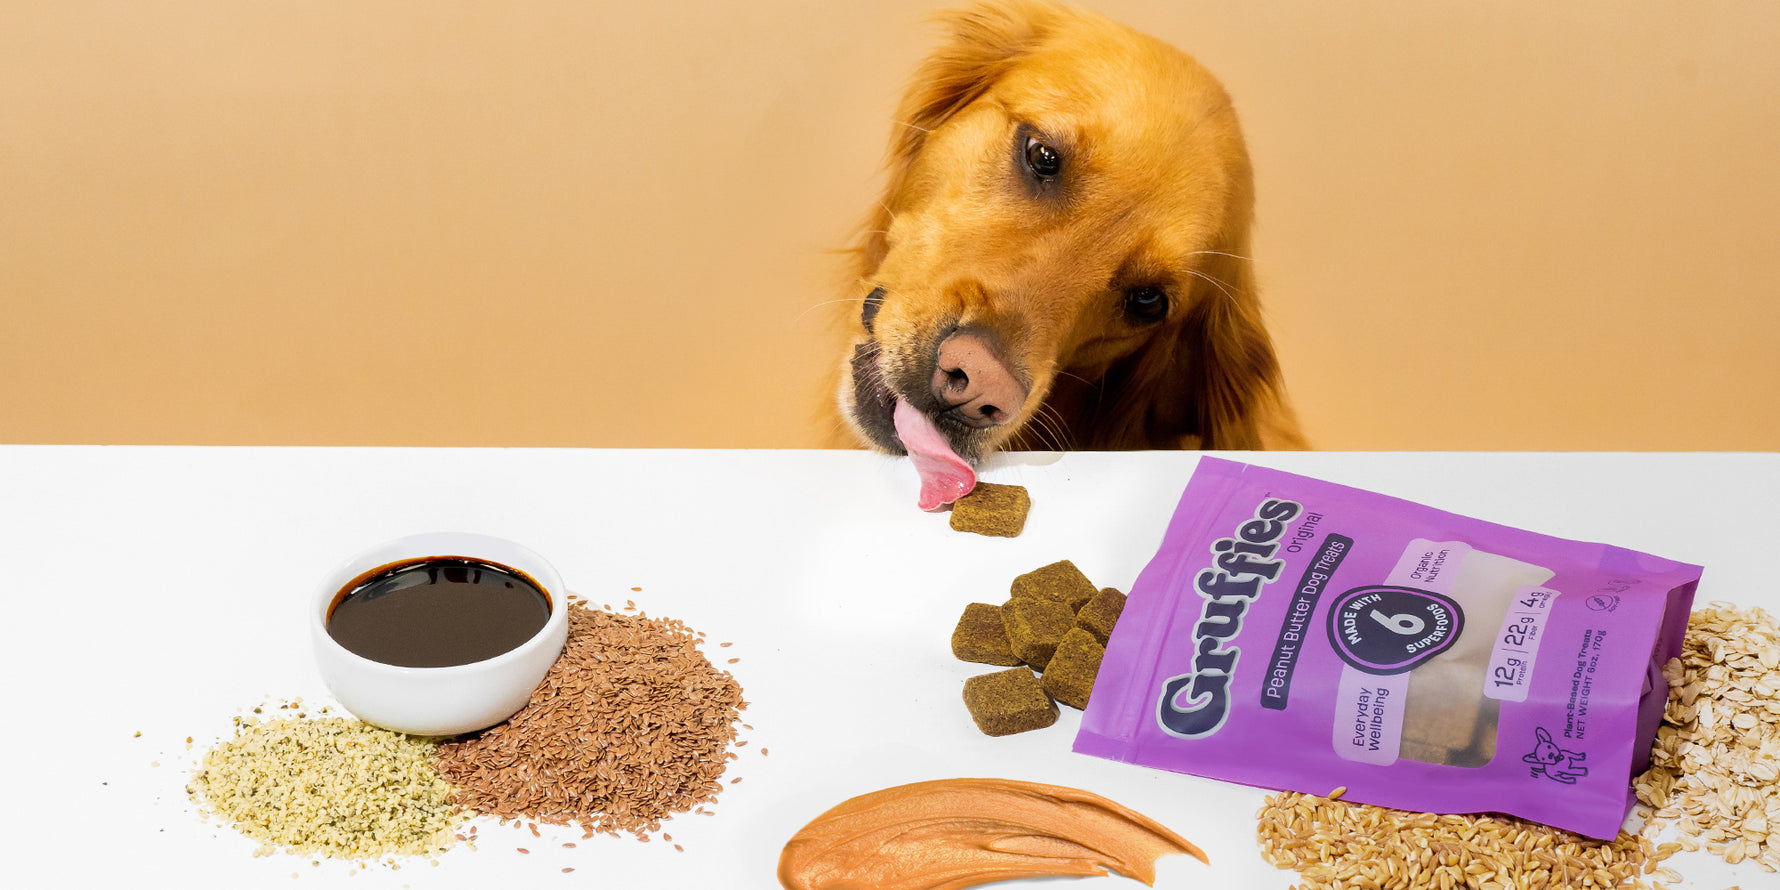 Gruffies Dog Treats: Nutritious Superfood-Infused Treats for Your Furr